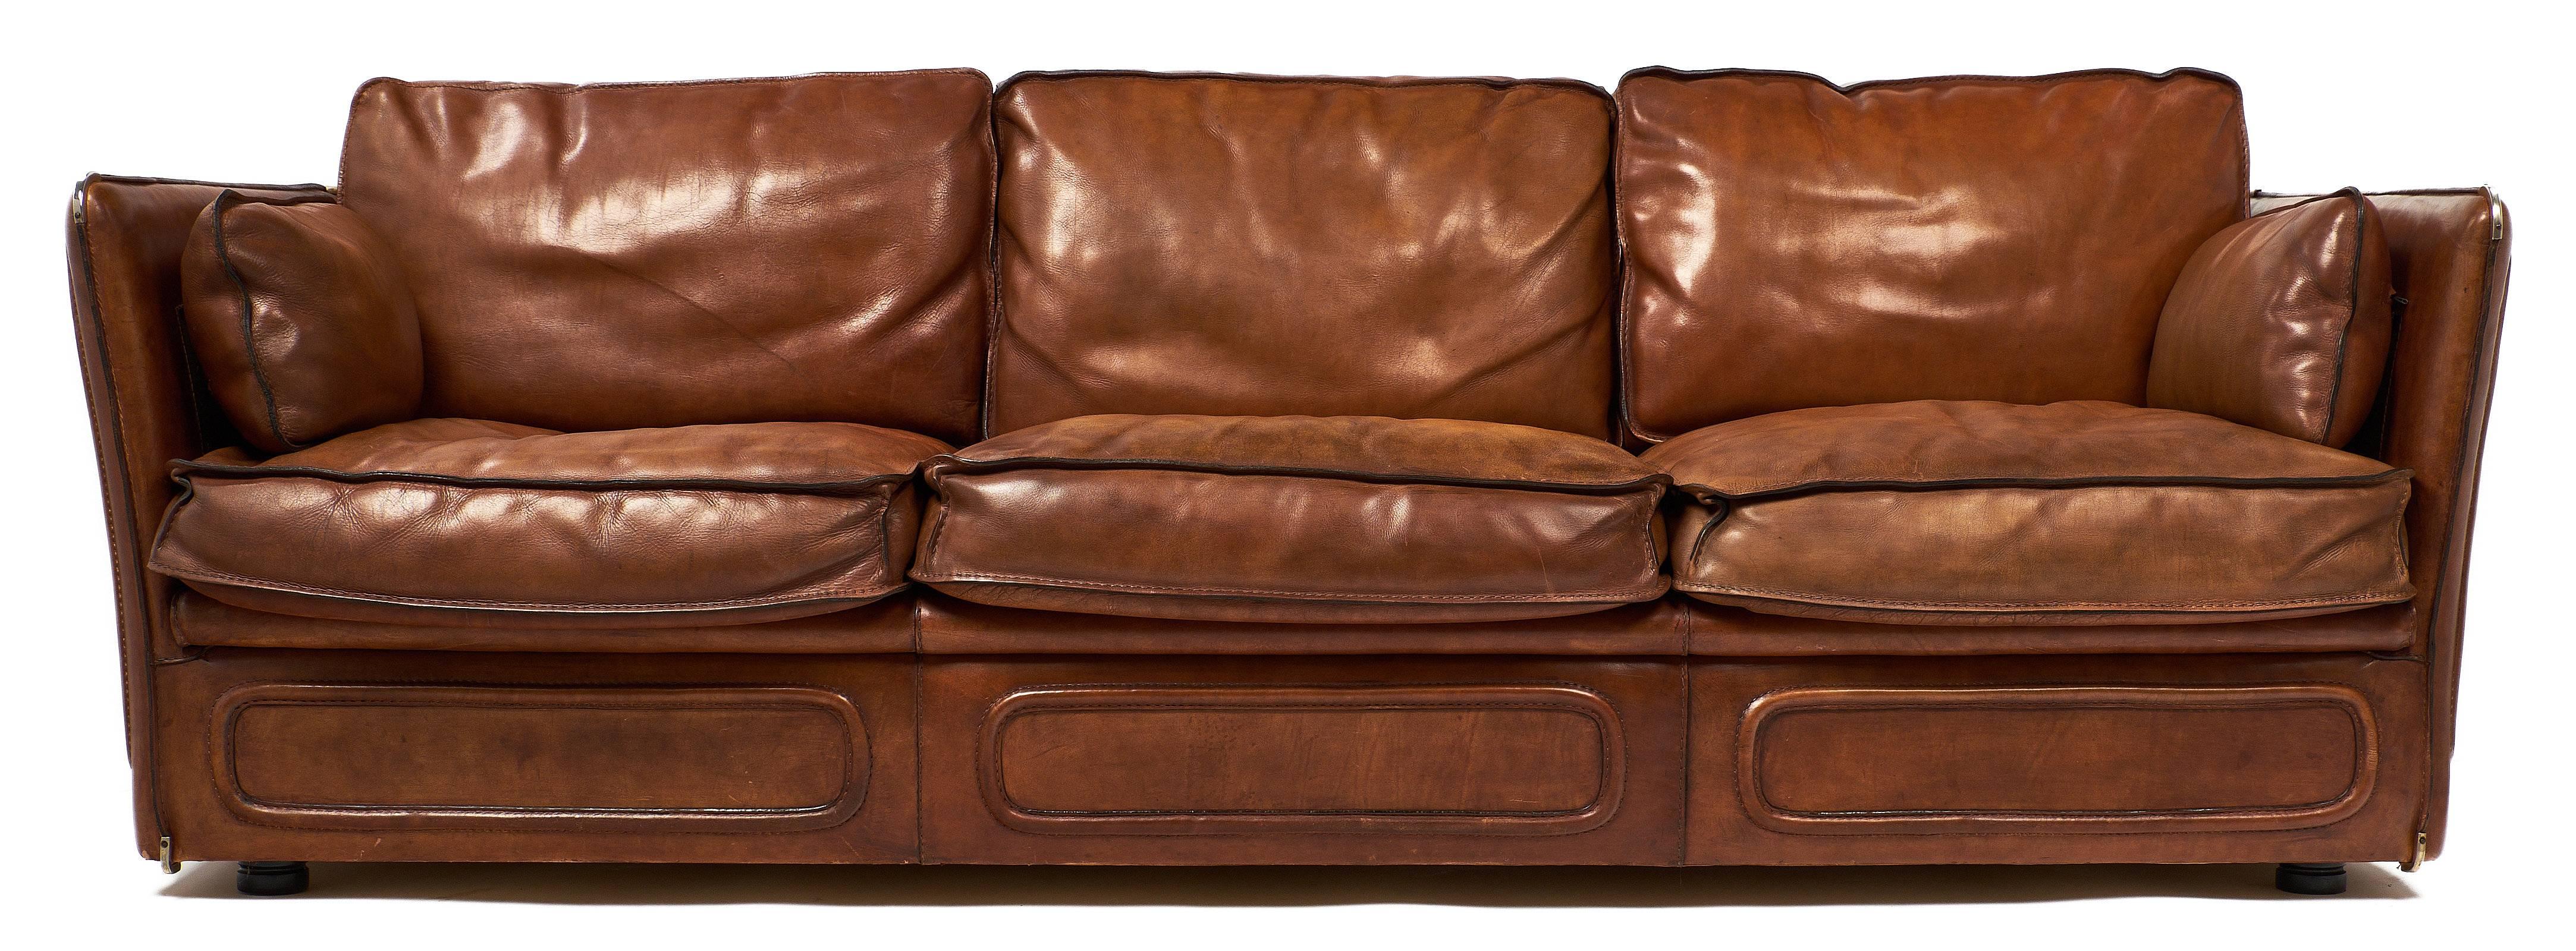 Fantastic vintage French sofa made completely of full buffalo hide leather in a warm cognac color. This piece features stunning equestrian saddlery style stitching on the sides, back, and below the seat on the front. These details are quite gorgeous